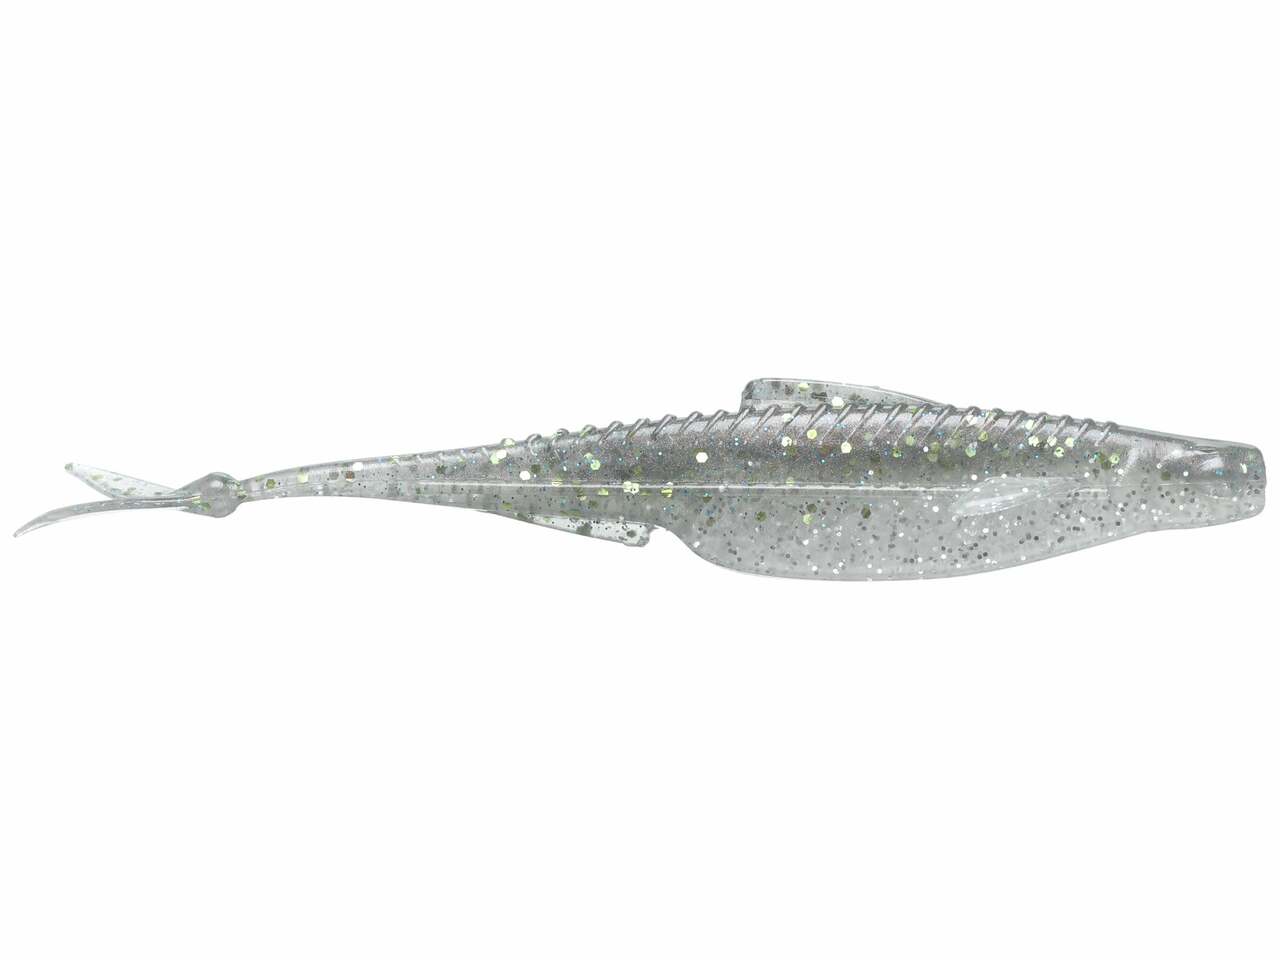 More than just your average soft plastic jerkbait, the 6th sense Flush Soft Jerkbait is packed with a number of details and realistic features that separate it from the competition. Measuring at 5.2” in length, this fluke style bait features a split belly and fork tail, but also includes matching pectoral fins, a dorsal fin, and keeled belly that allow the bait to remain in a balanced, upright position when fishing.